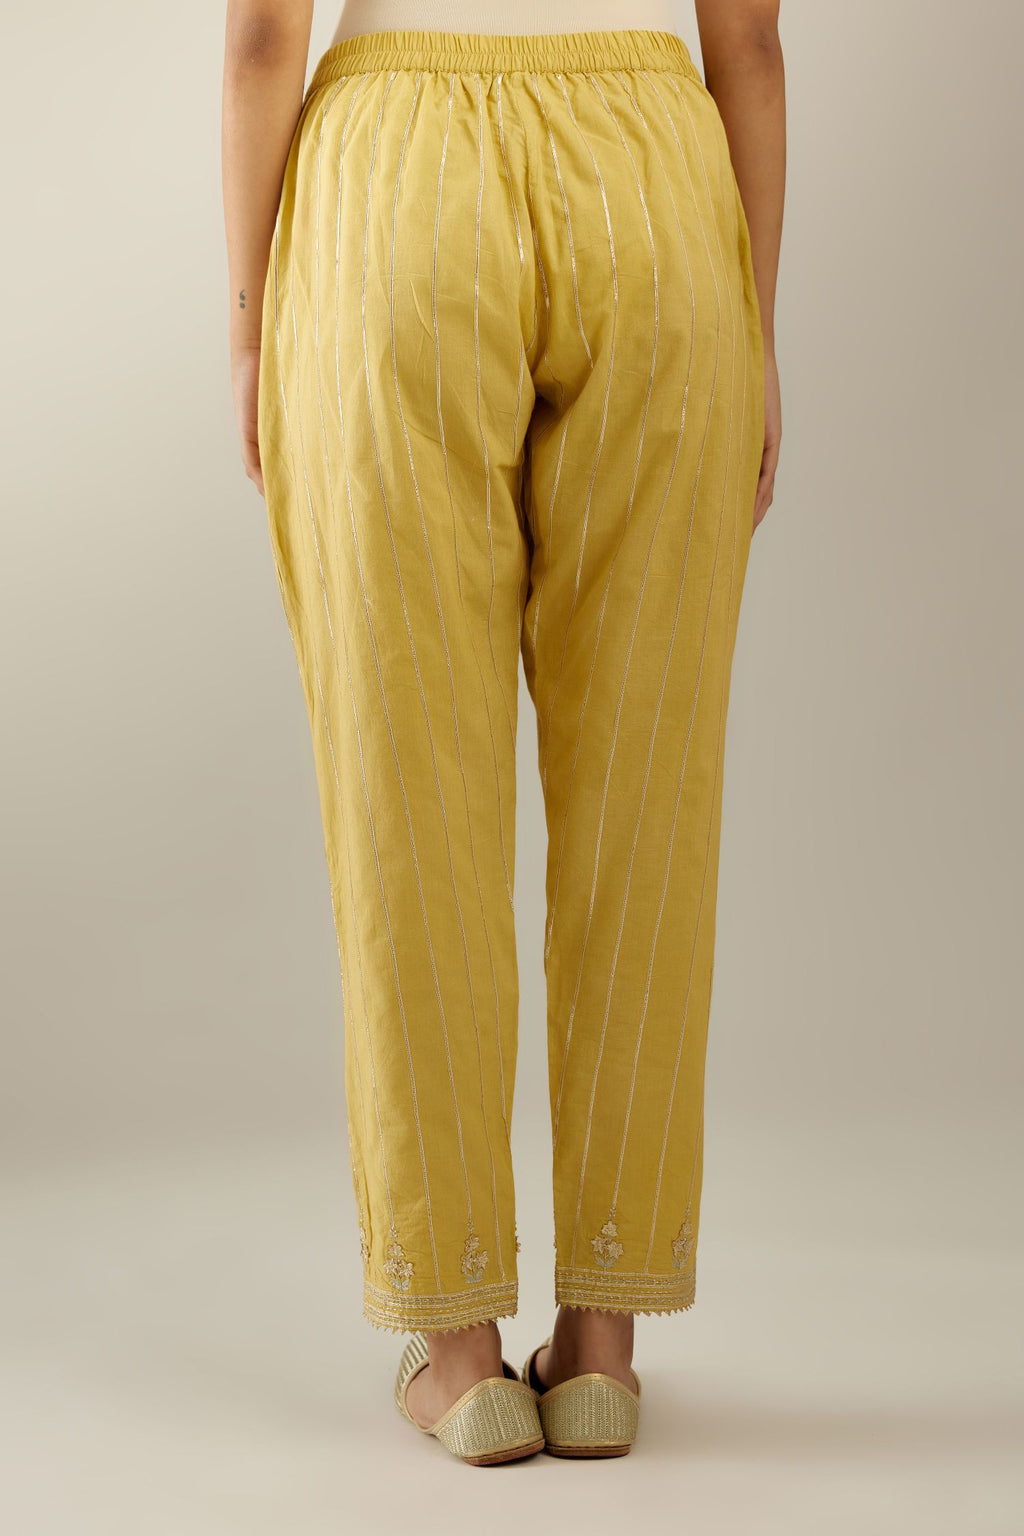 Yellow cotton straight pants with all-over gold gota lines and zari embroidery at hem.